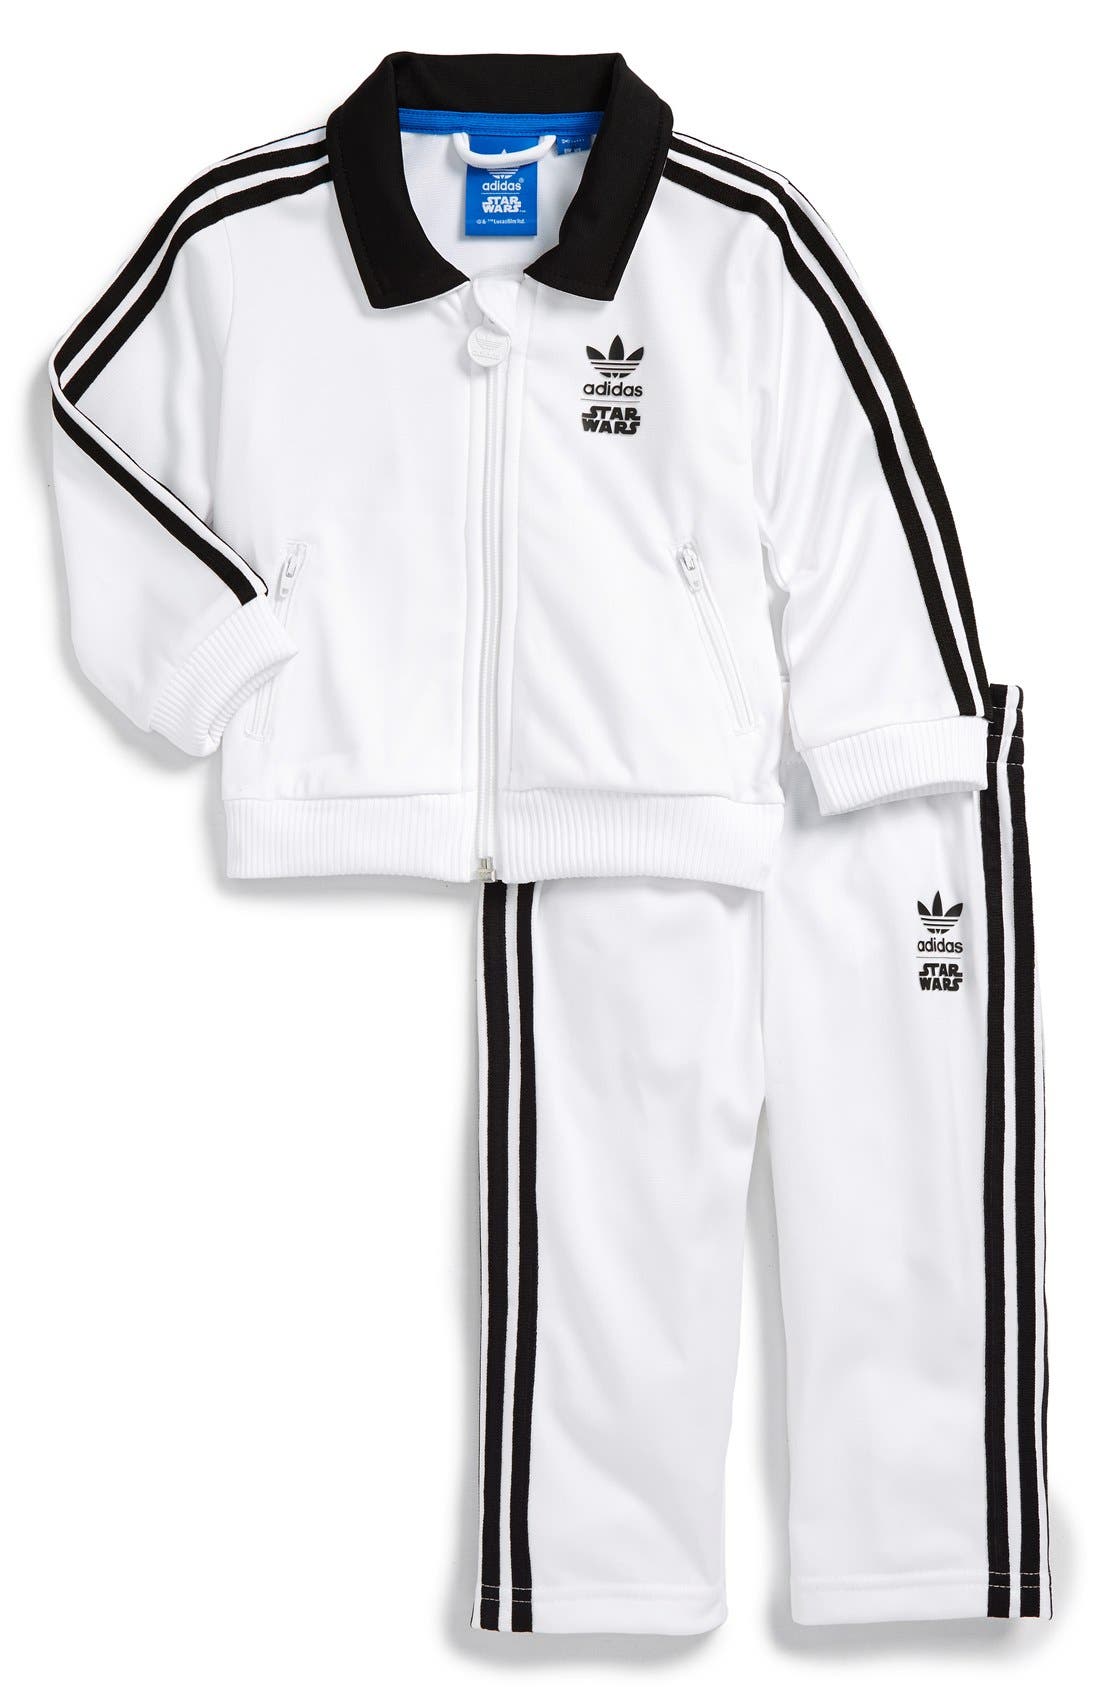 adidas tracksuit nordstrom